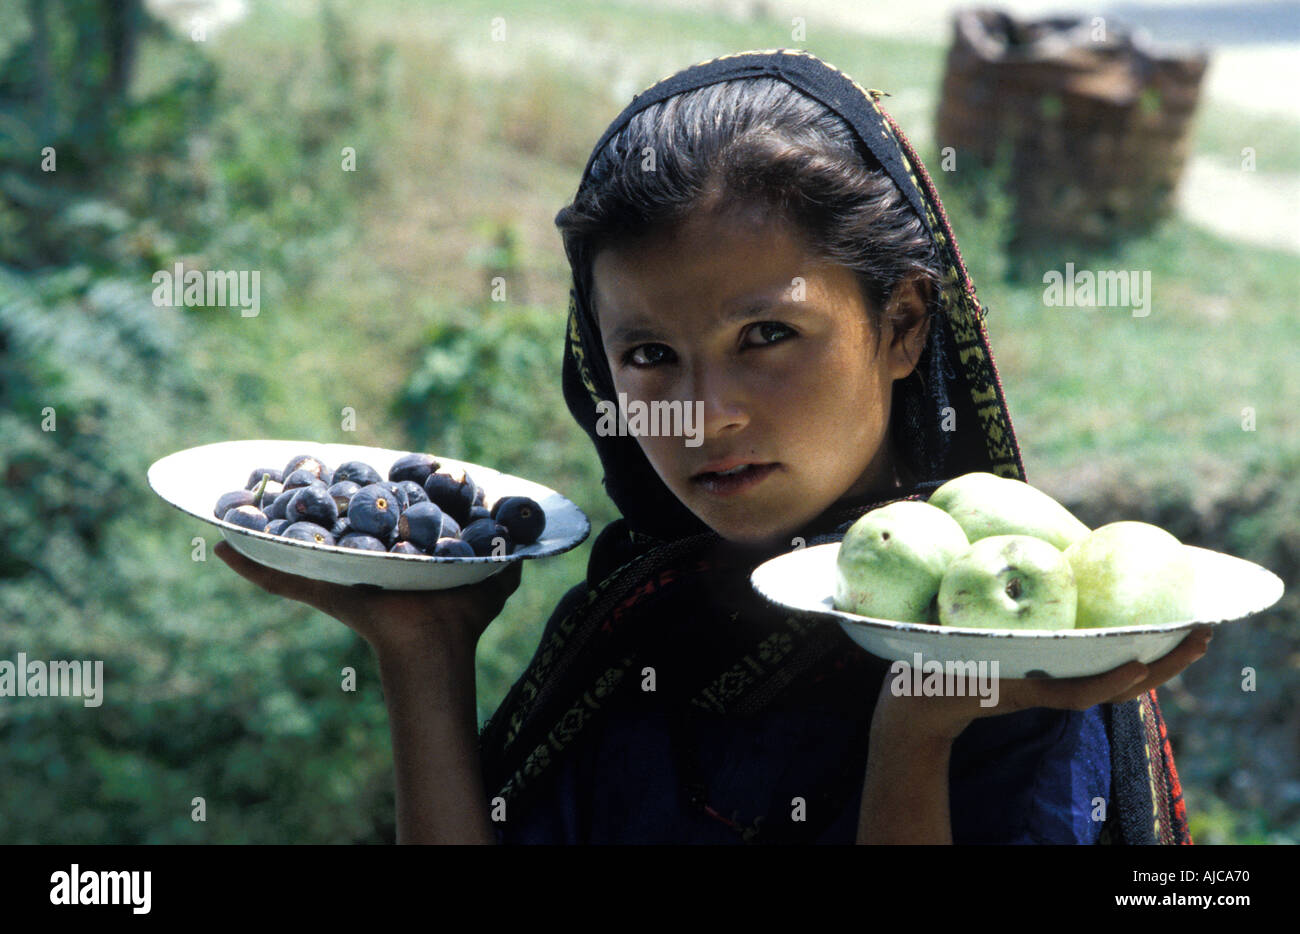 Young Pakistani girl from the Swat valley near Madyan and Miandam selling pears and figs Pakistan Stock Photo